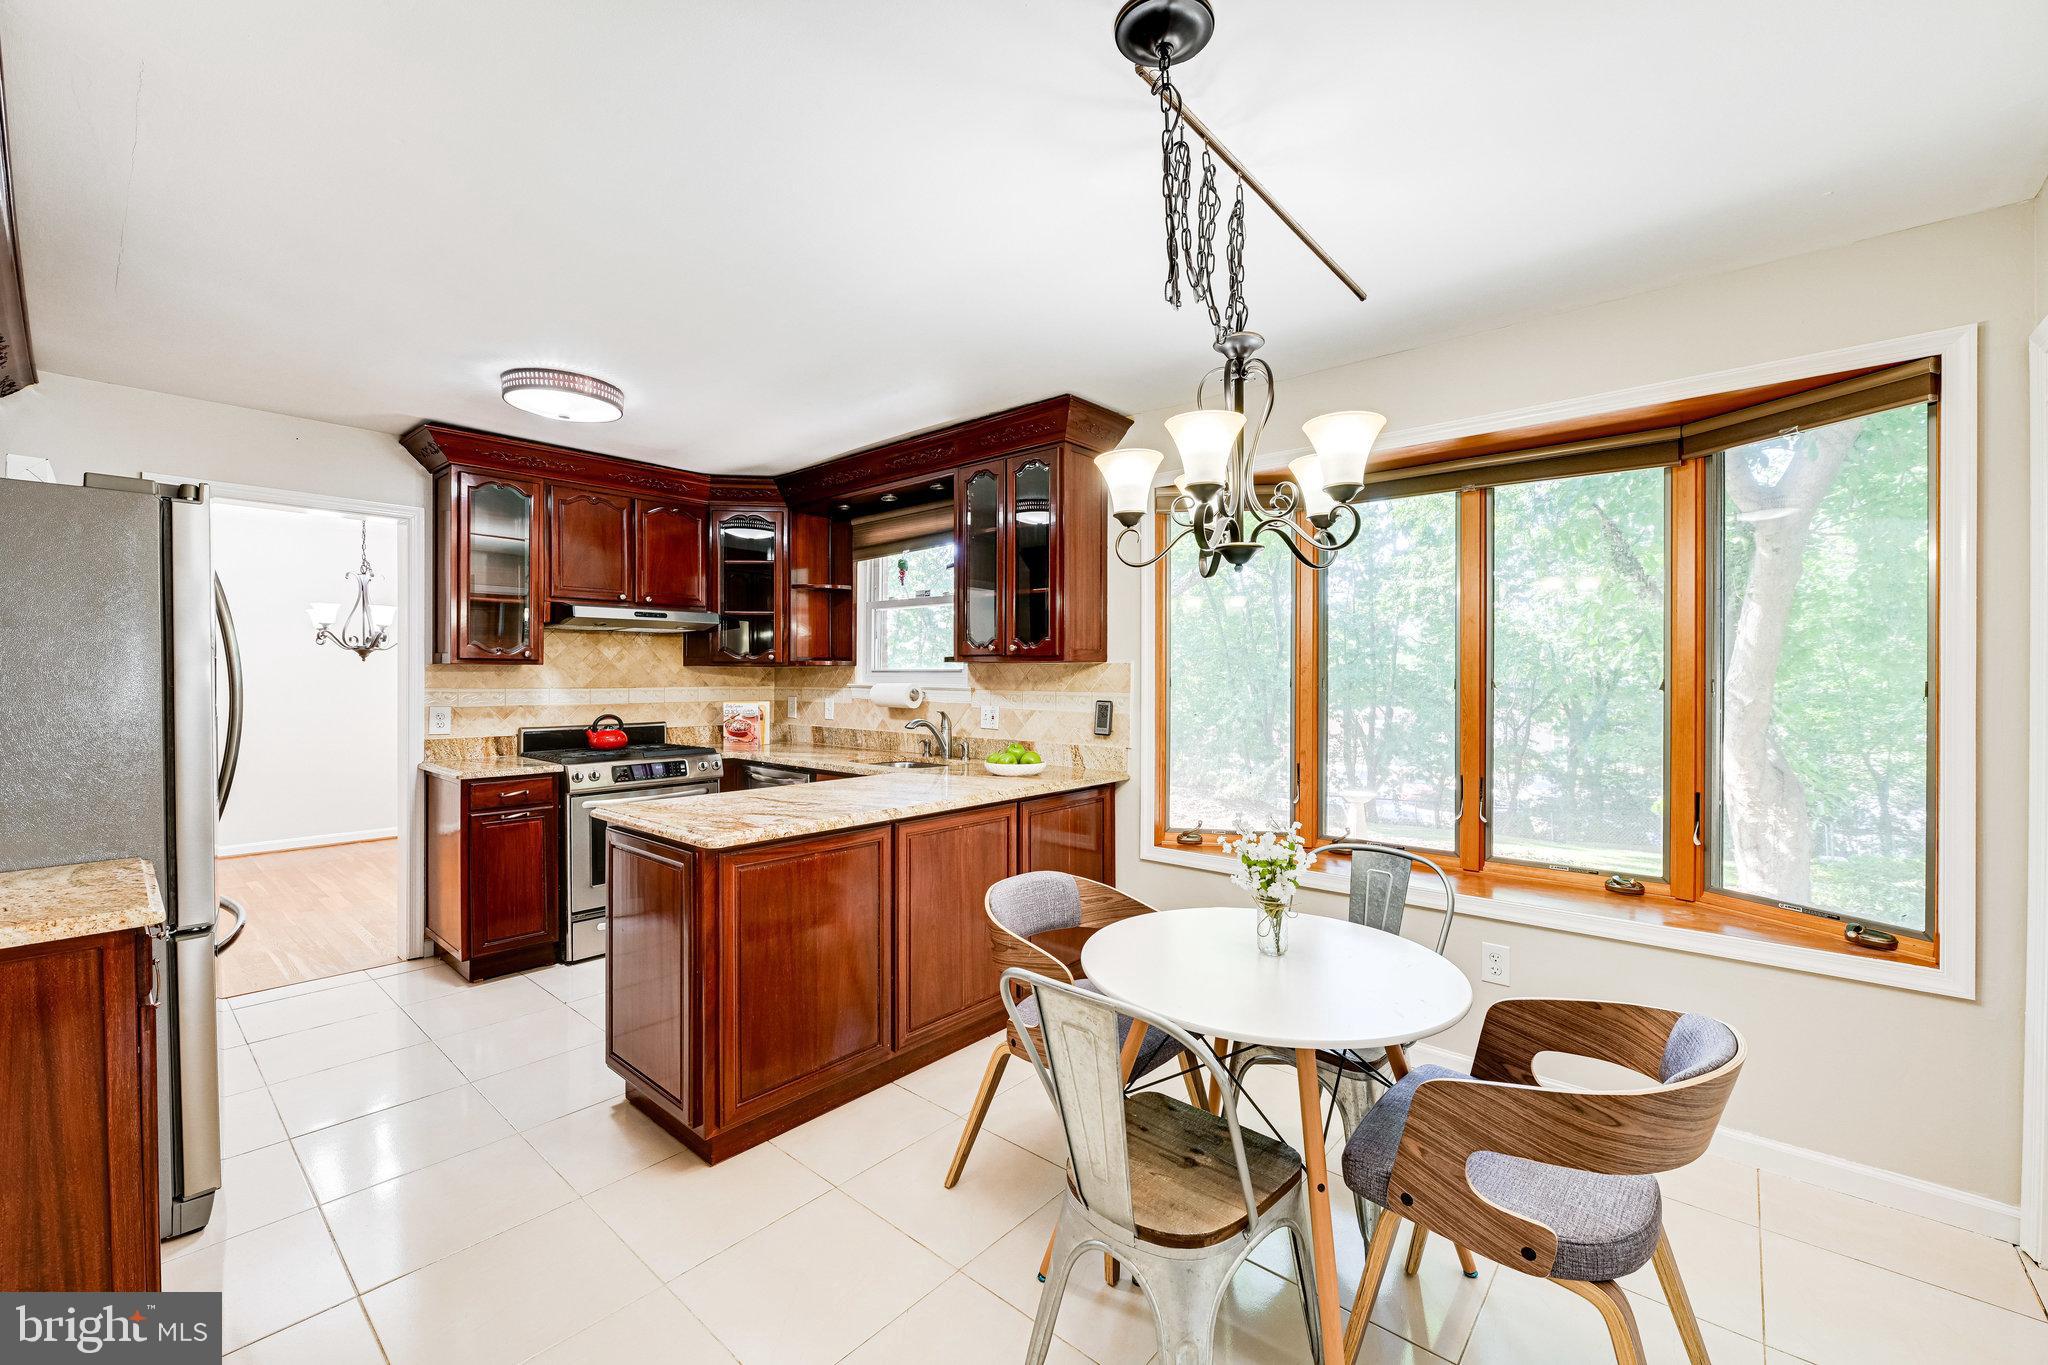 a kitchen with stainless steel appliances granite countertop a kitchen island hardwood floor sink stove dining table and chairs